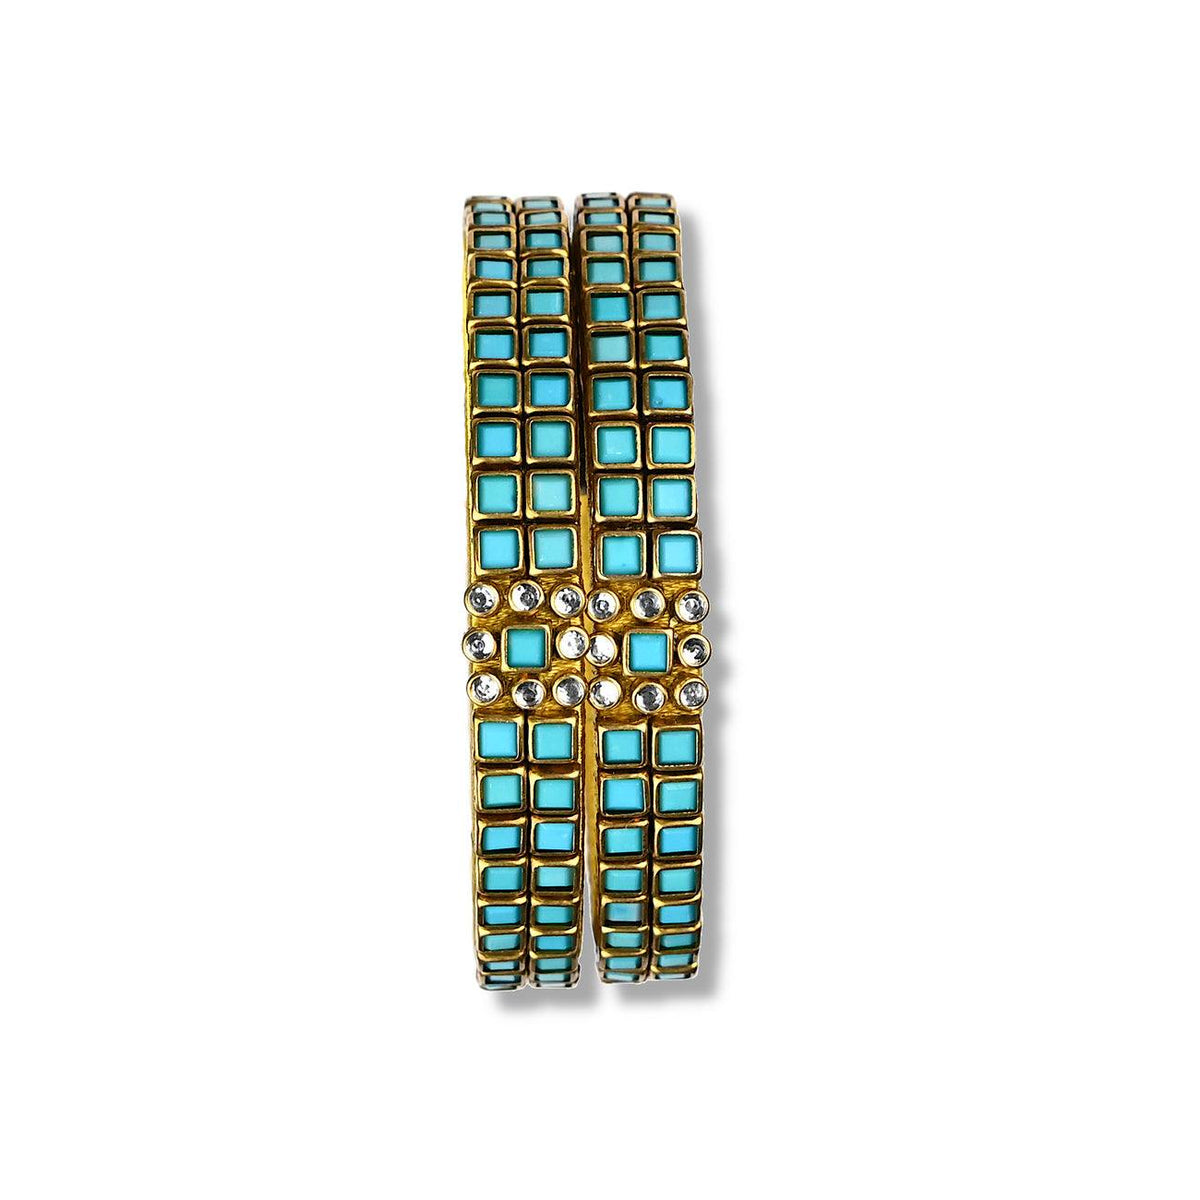 Sky blue Kundan stone bangle decorated with blue and glass colored Kundan stone bezels in square & circle shape over gold silk threads.